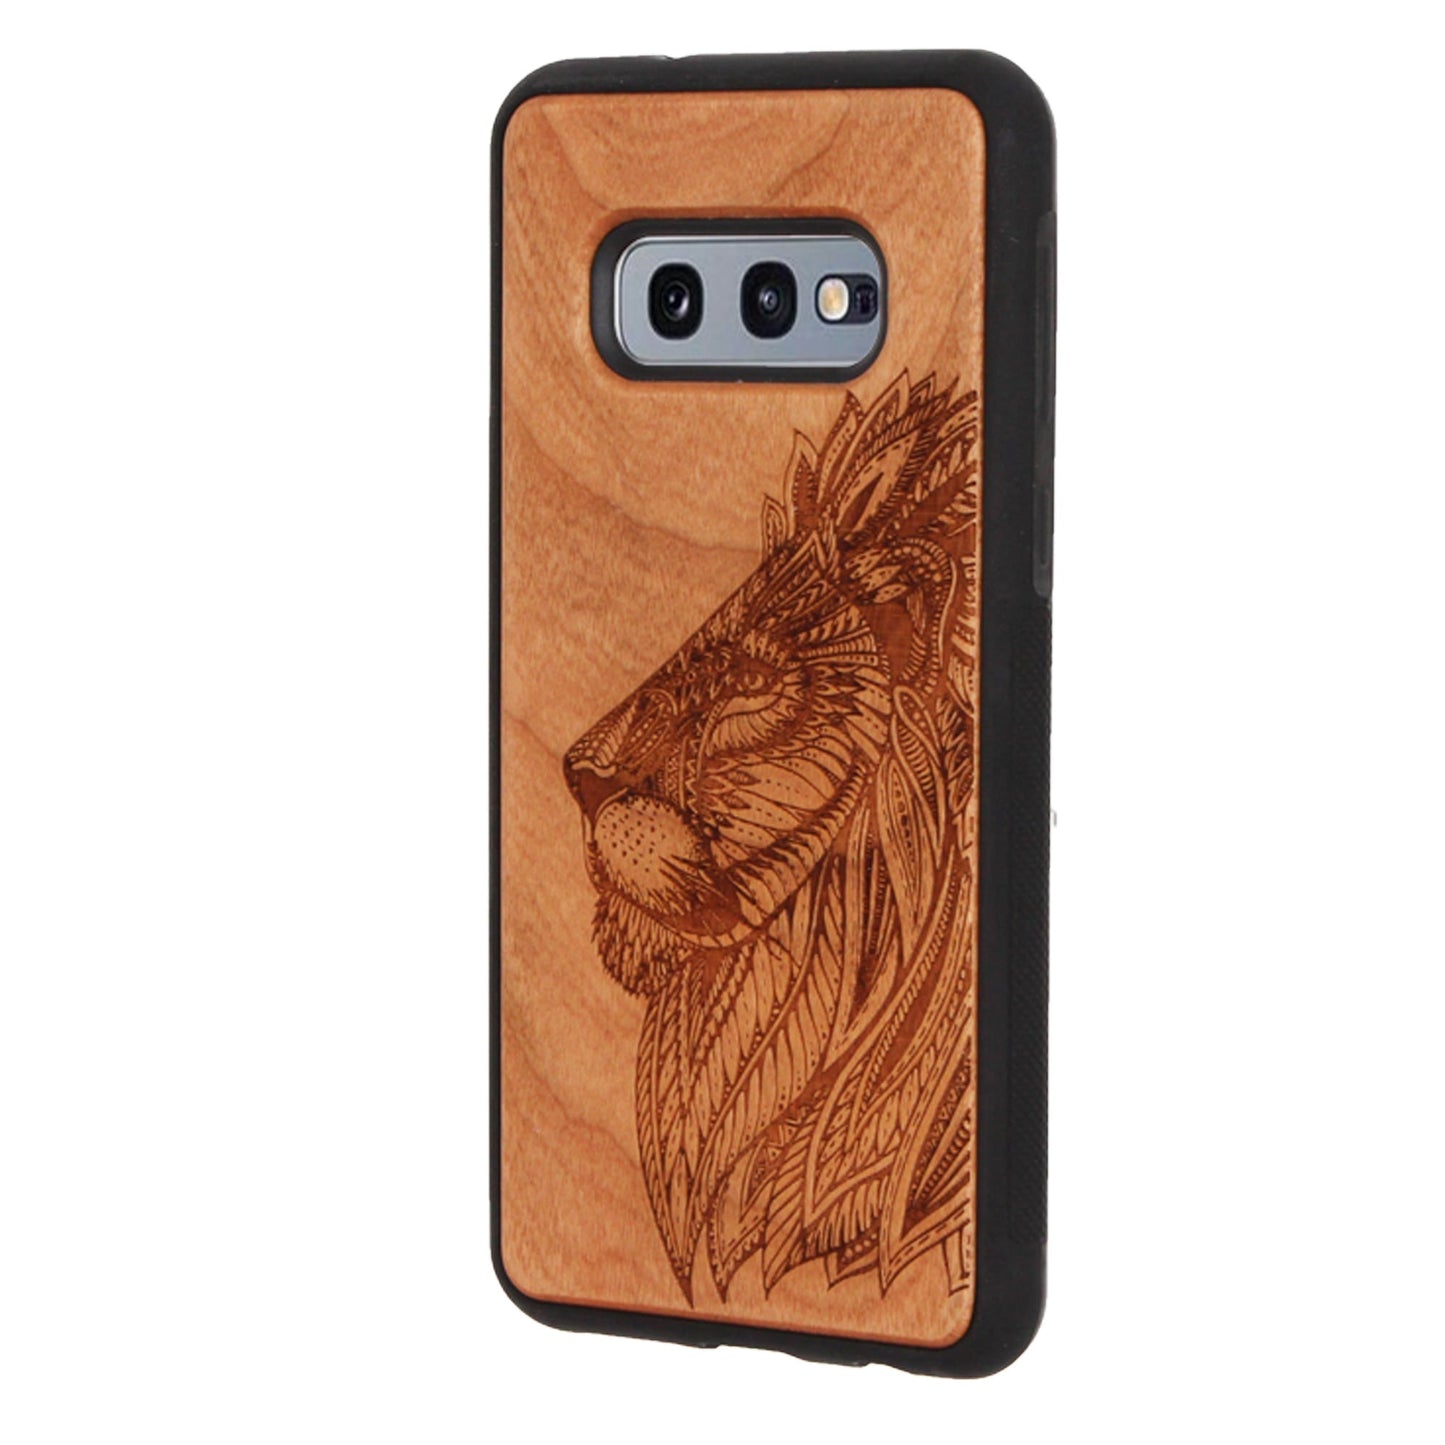 Eden Lion case made of cherry wood for Samsung Galaxy S10E